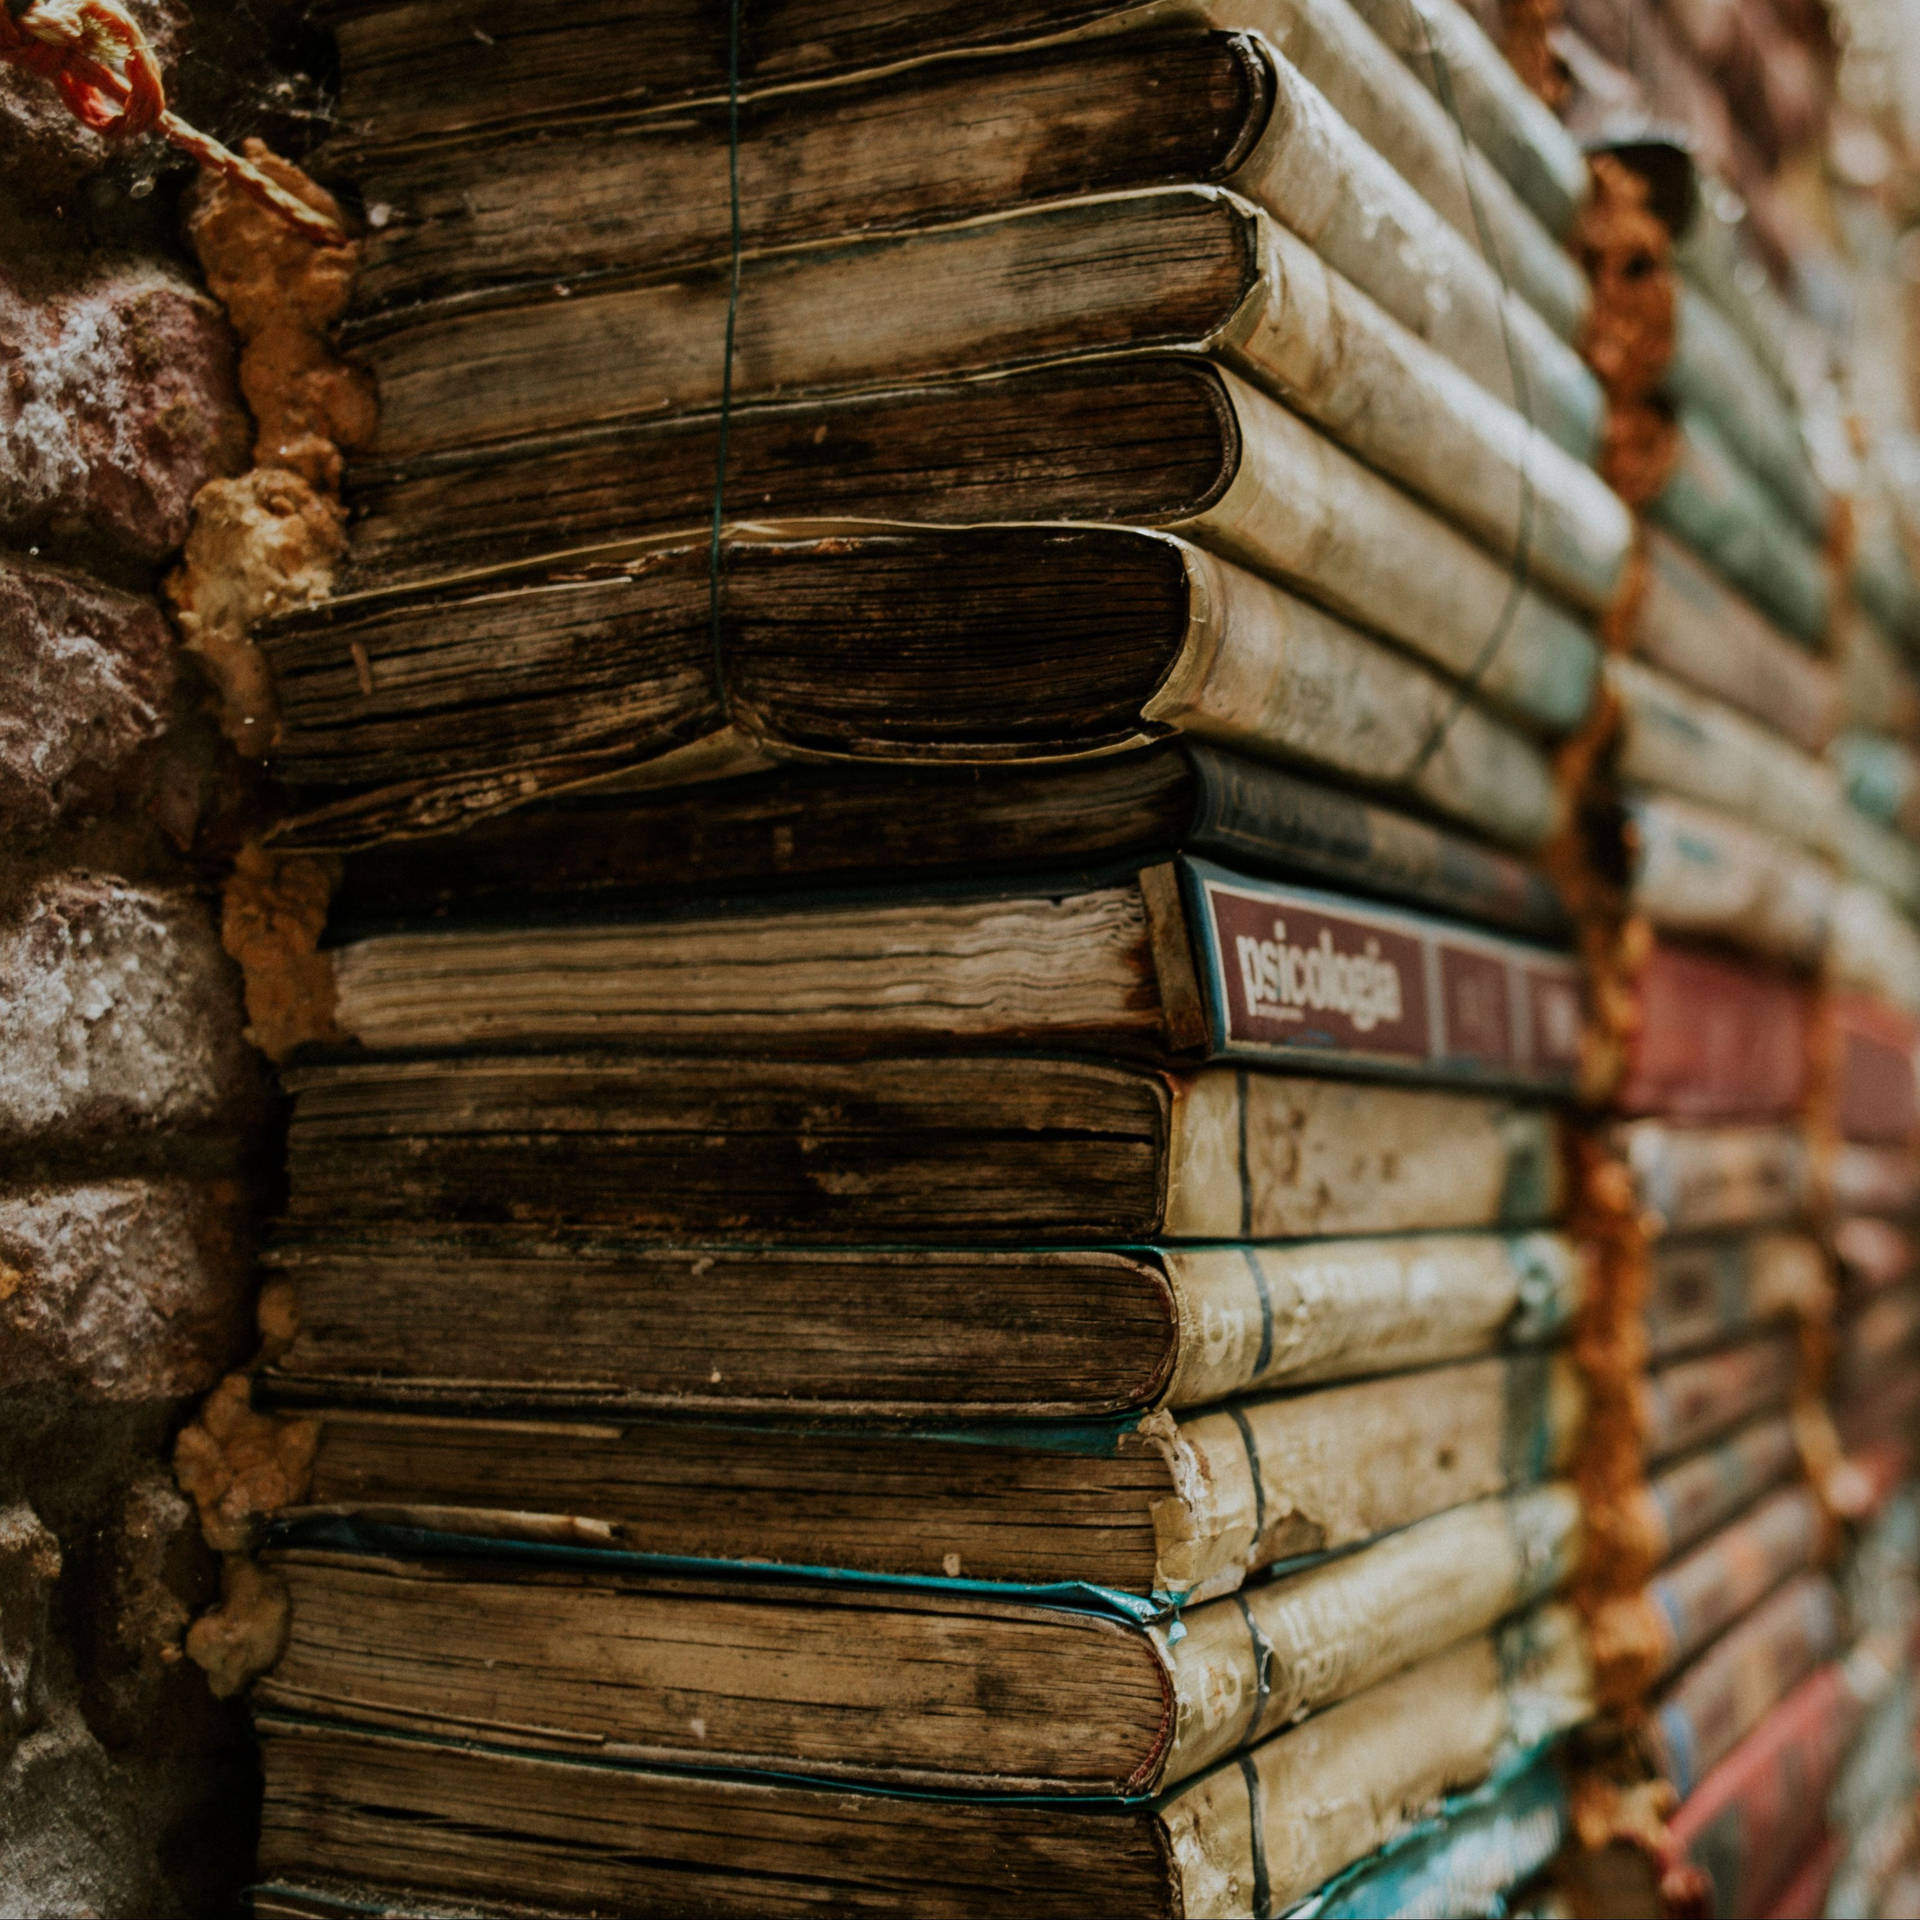 Piled Books With Worn-out Book Cover Library Background